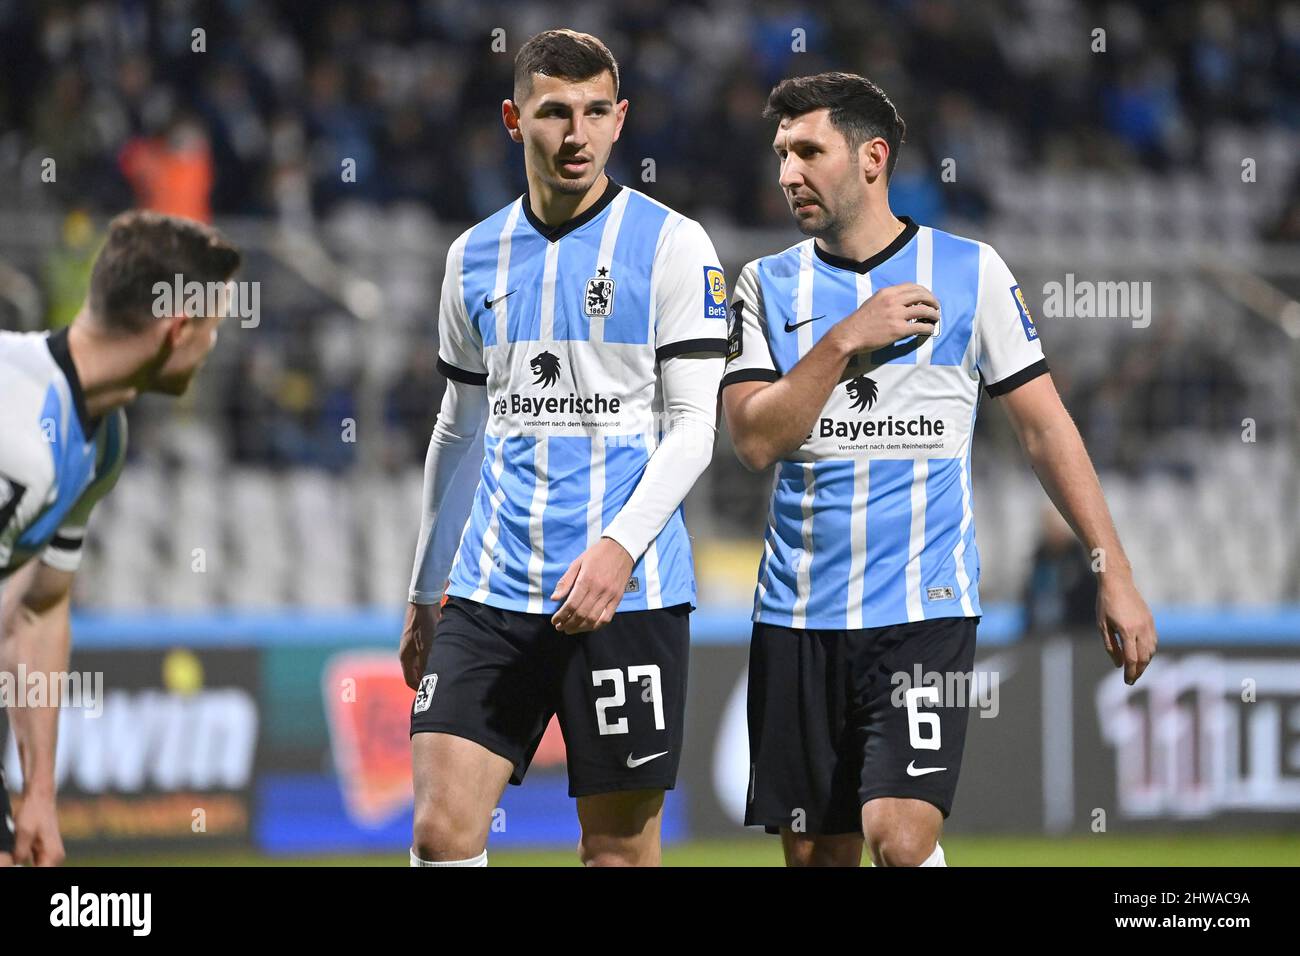 Munich, Germany. 04th Mar, 2022. Munich, Deutschland. 04th Mar, 2022. from left: Semi BELKAHIA (TSV Munich 1860), Stefan SALGER (TSV Munich 1860), action, football 3rd division, division 3, TSV Munich 1860 - SC Verl 2-0, on 04.03.2022 in Munich GRUENWALDER STADIUM. DFL REGULATIONS PROHIBIT ANY USE OF PHOTOGRAPHS AS IMAGE SEQUENCES AND/OR QUASI-VIDEO. Credit: dpa/Alamy Live News Credit: dpa picture alliance/Alamy Live News Stock Photo